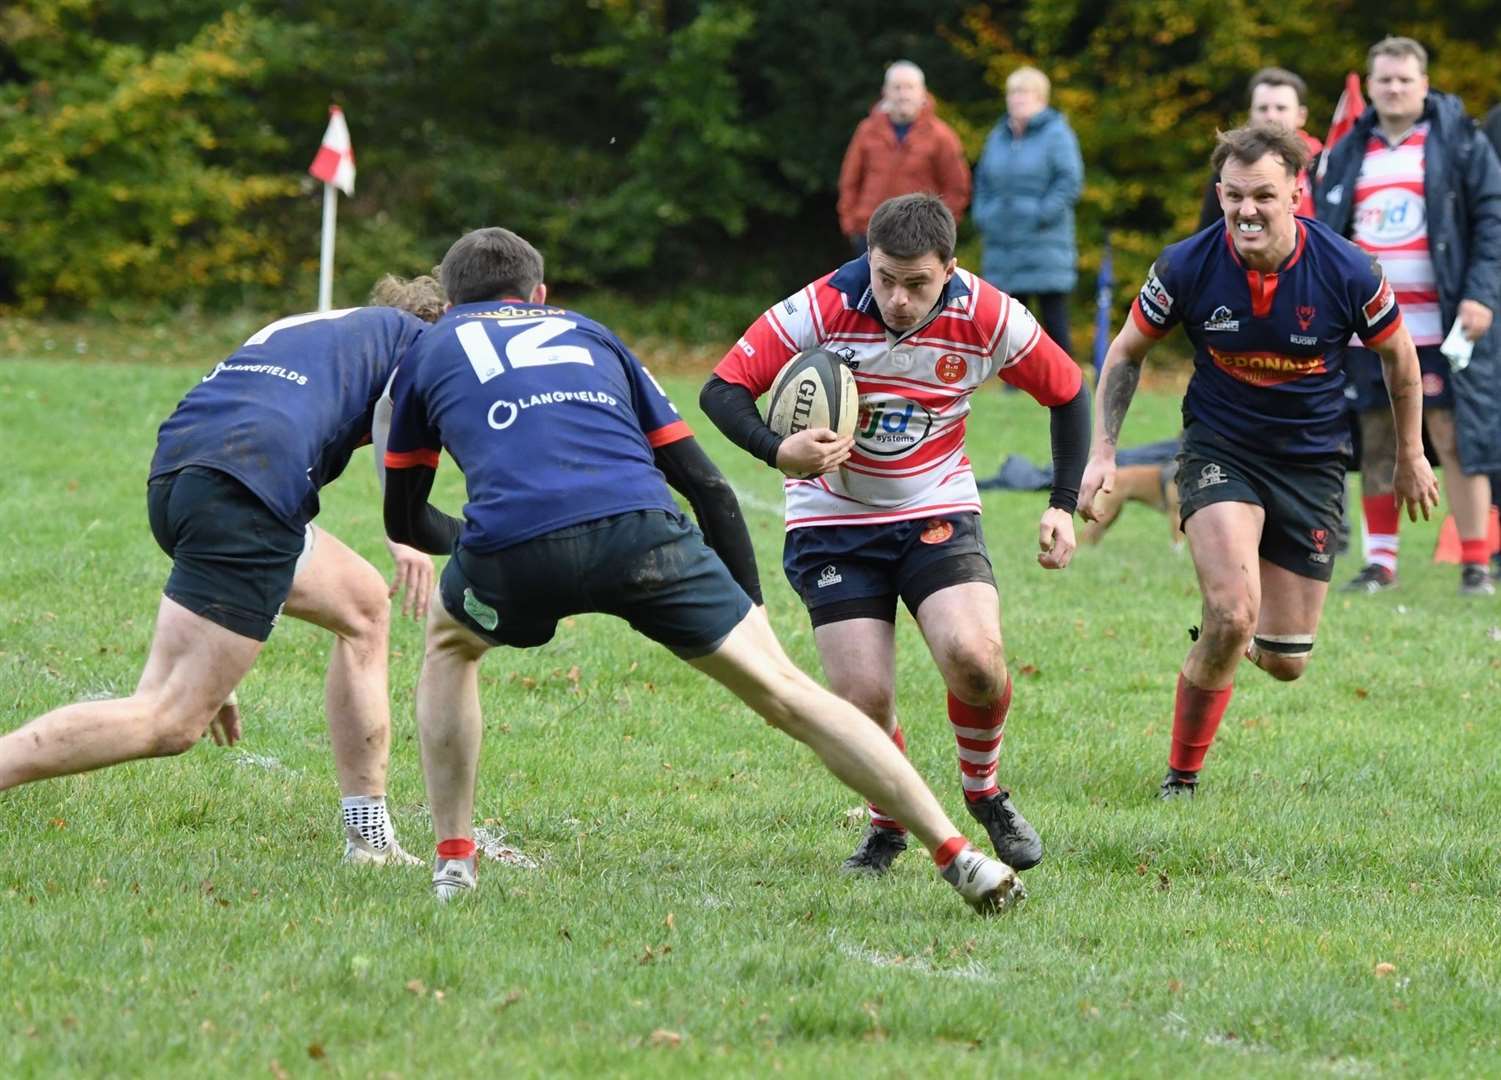 Lewis Hogg looks to take contact from two defenders. Photo: James Officer